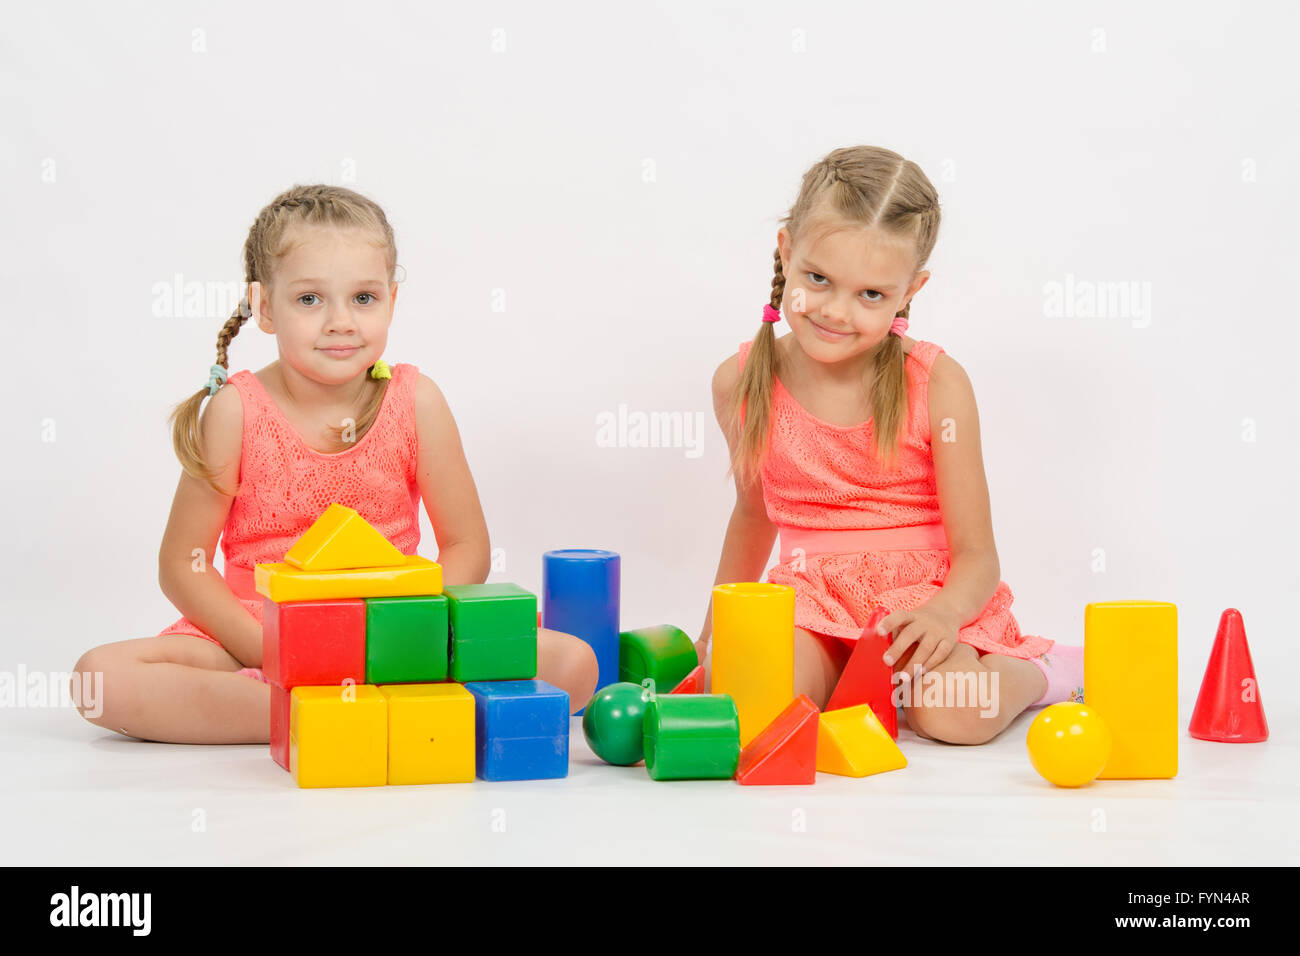 Sisters playing with blocks Stock Photo